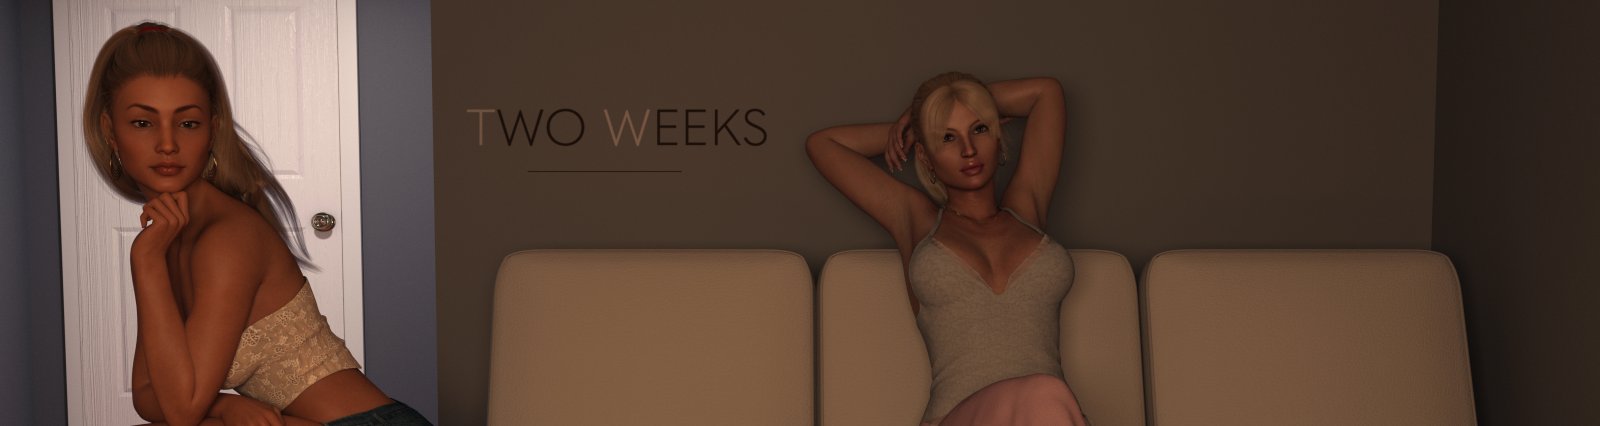 Two Weeks [Madek] Adult xxx Game Download